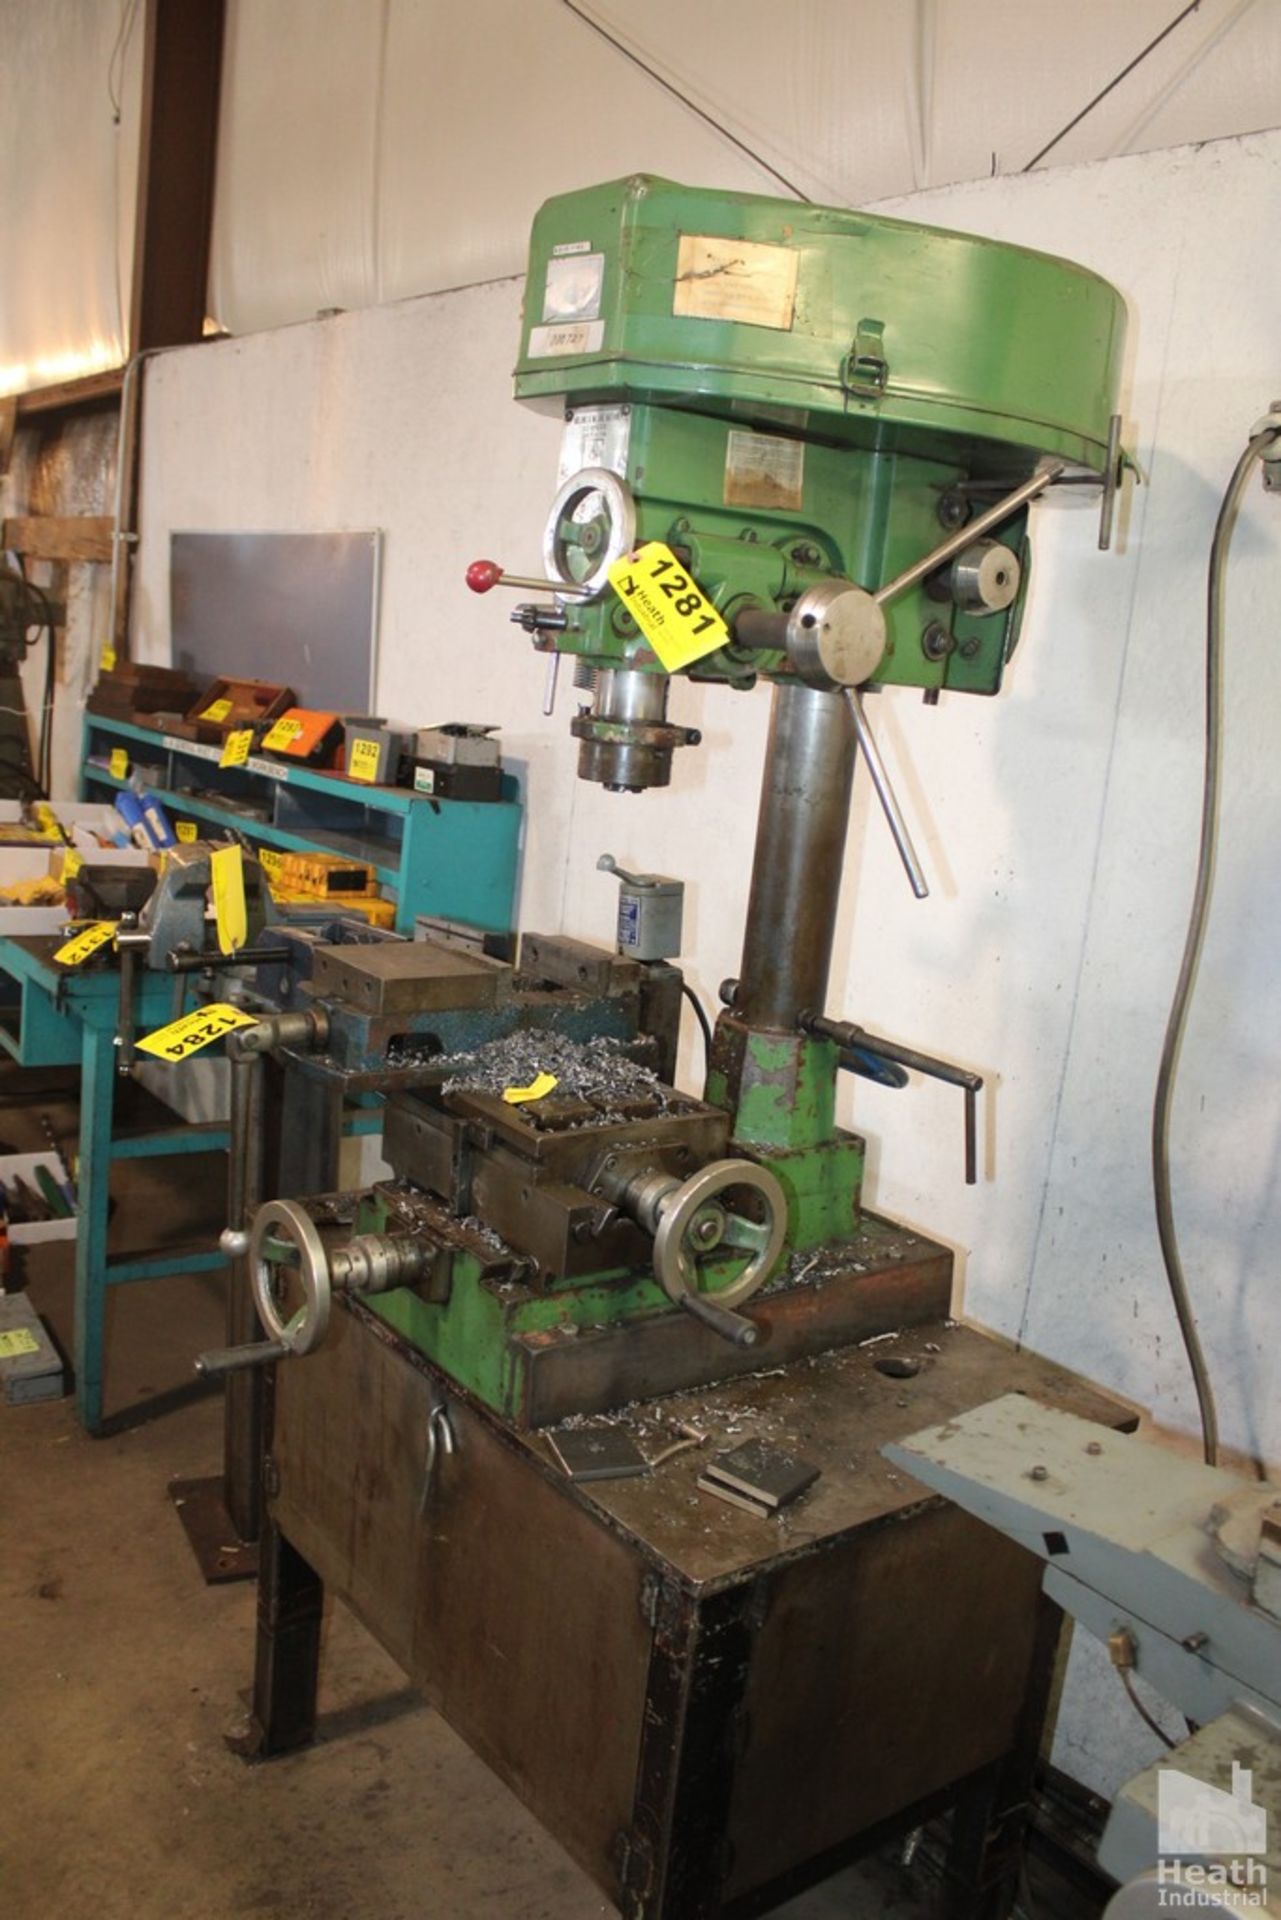 JET MODEL JET - 16 BENCHTOP MILL / DRILL MACHINE S/N: 43194 (1994), 2 HP / 1 PHASE